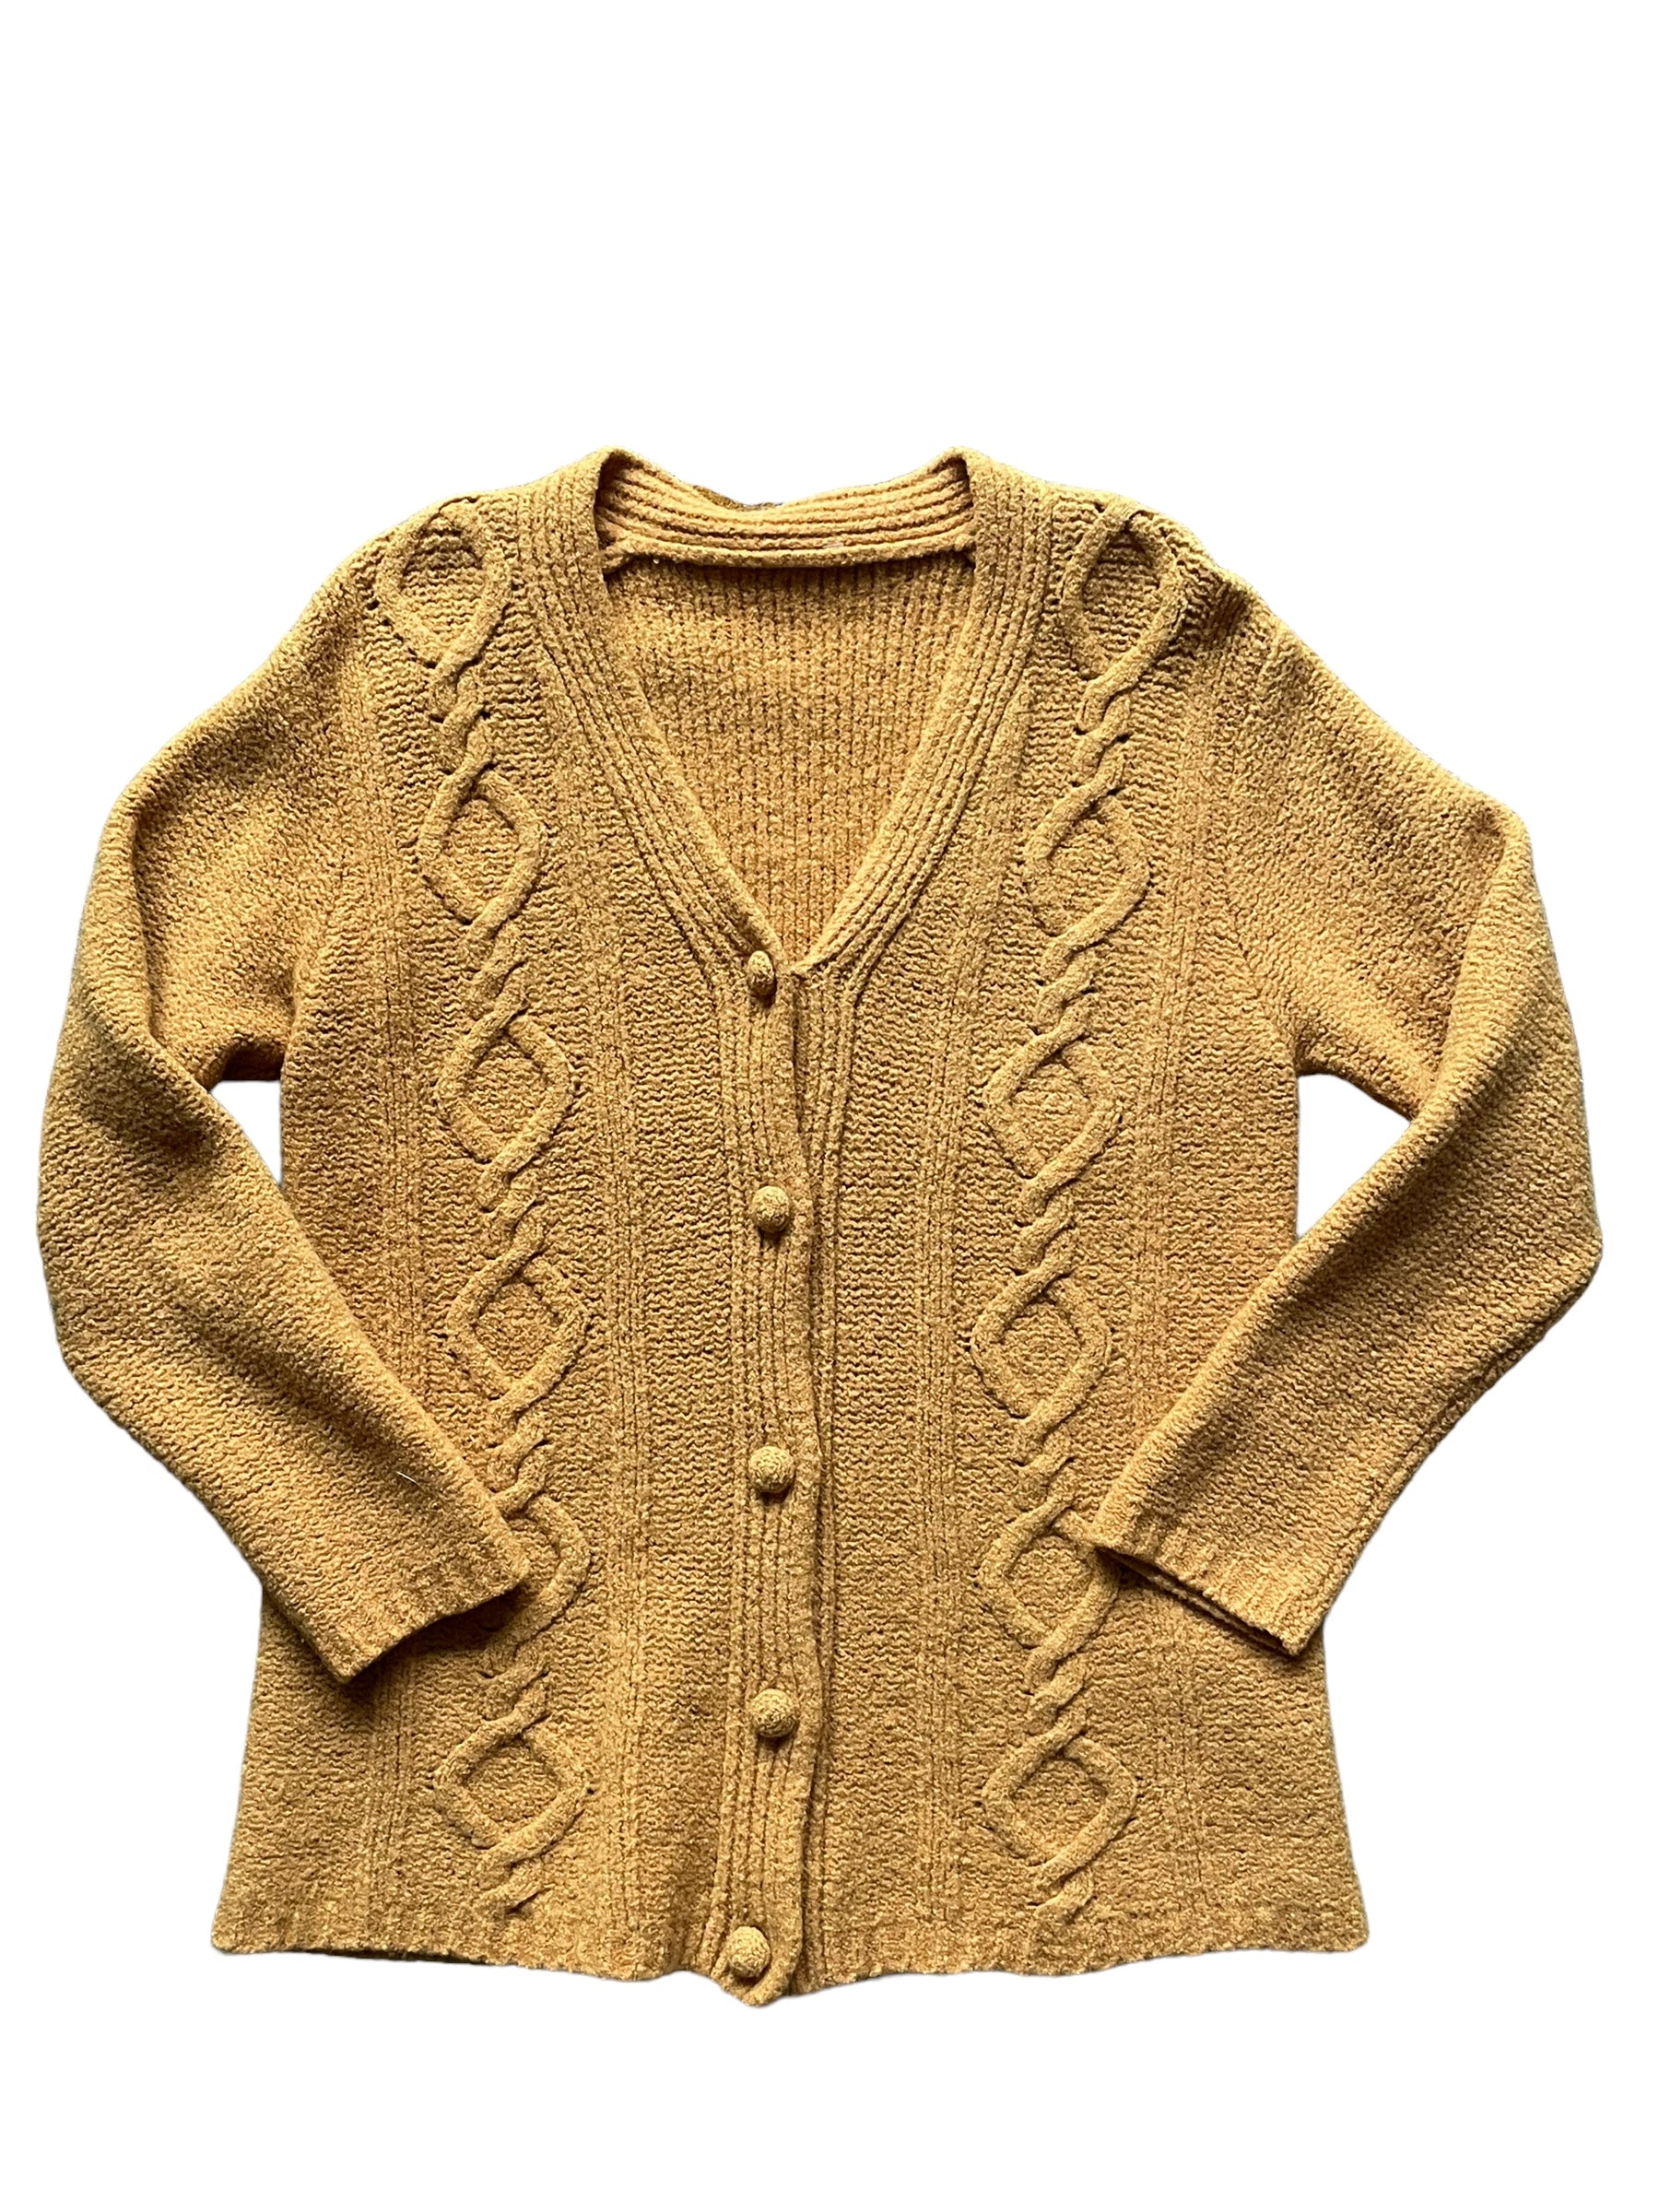 Full front view of Vintage Pumpkin Cable Knit Cardigan SZ S-M | Seattle Ladies Vintage | Barn Owl Seattle